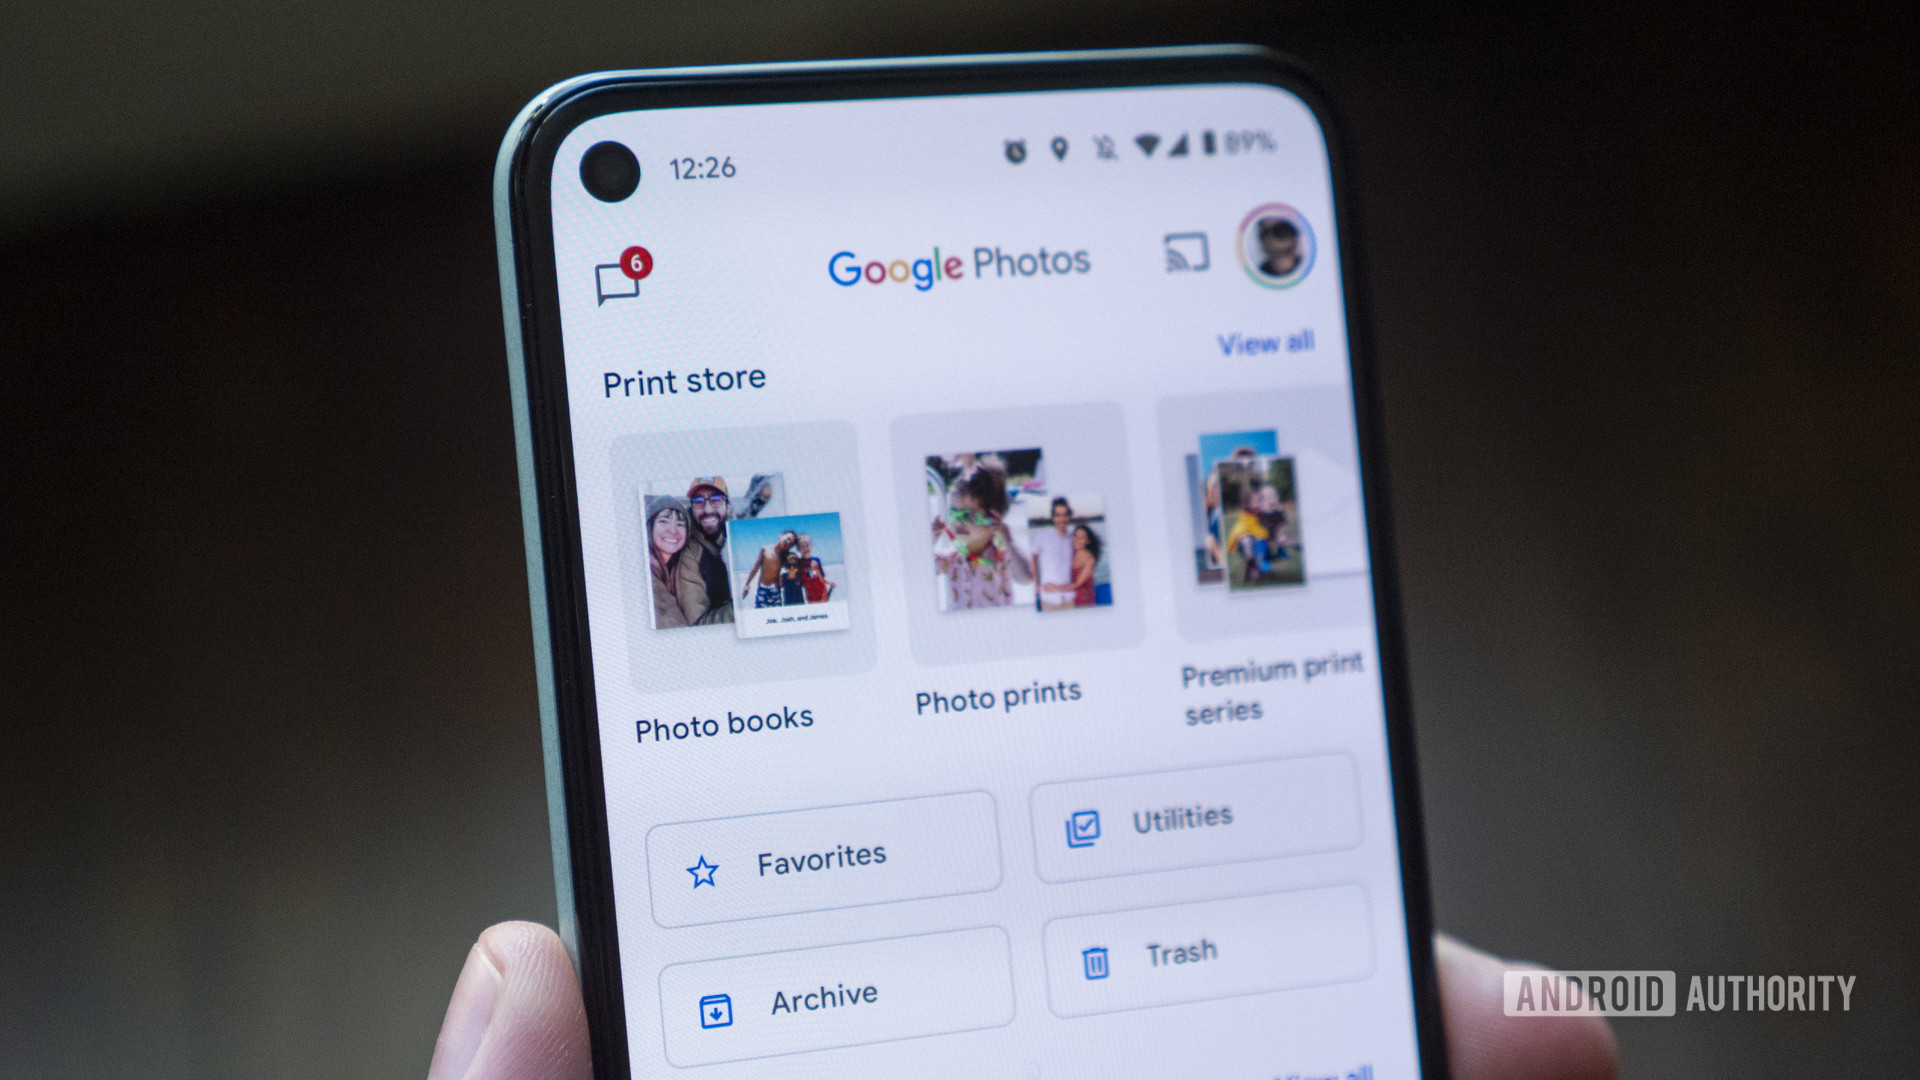 How to upload photos to Google Photos - Android Authority